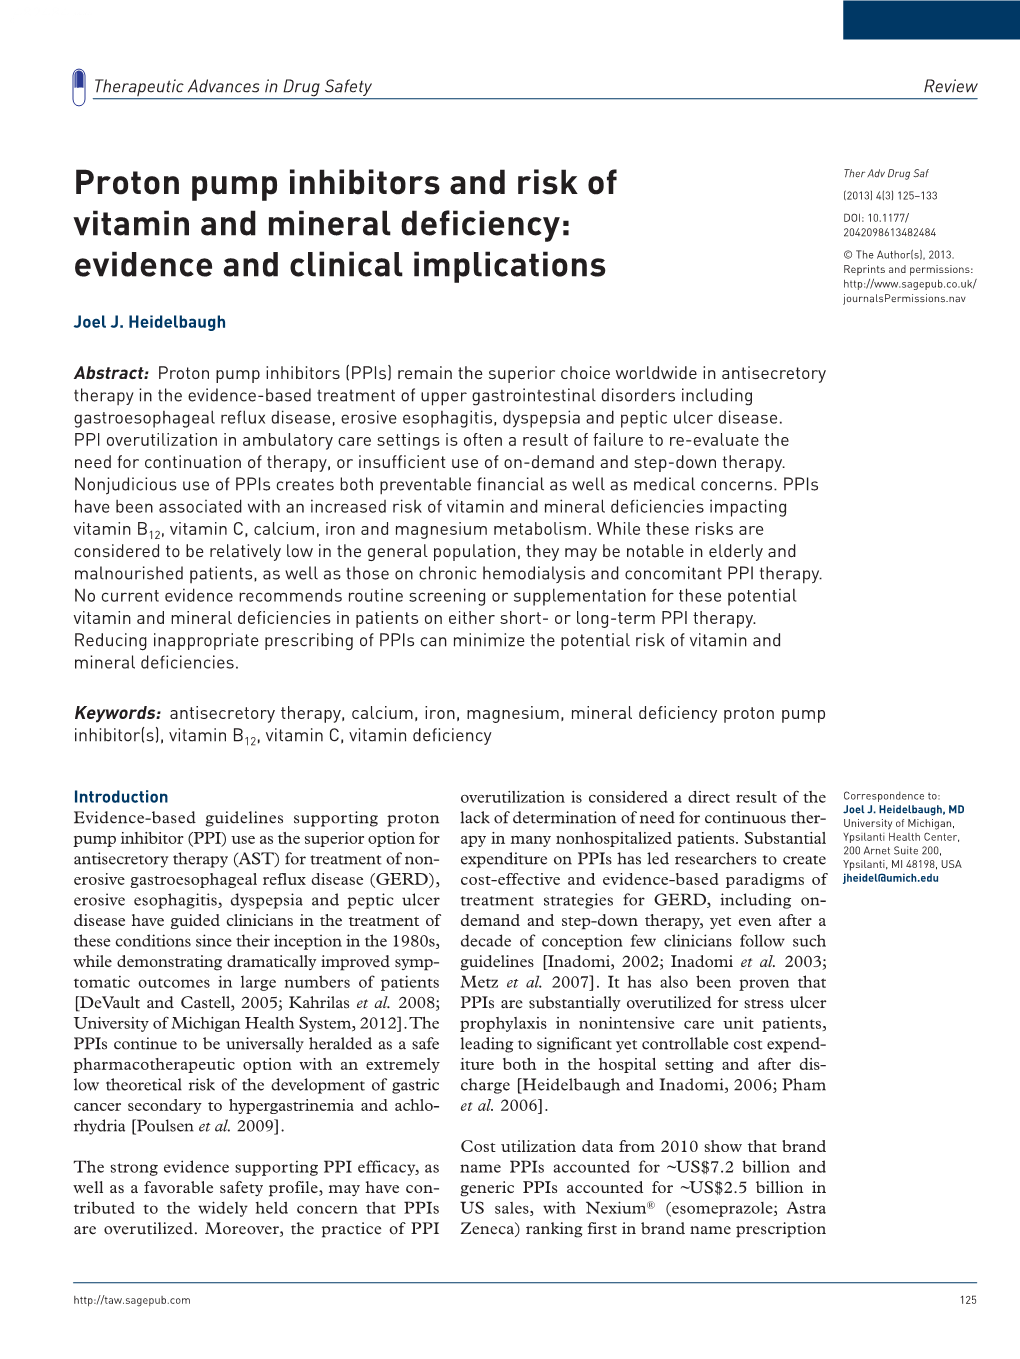 Proton Pump Inhibitors and Risk of Vitamin and Mineral Deficiency